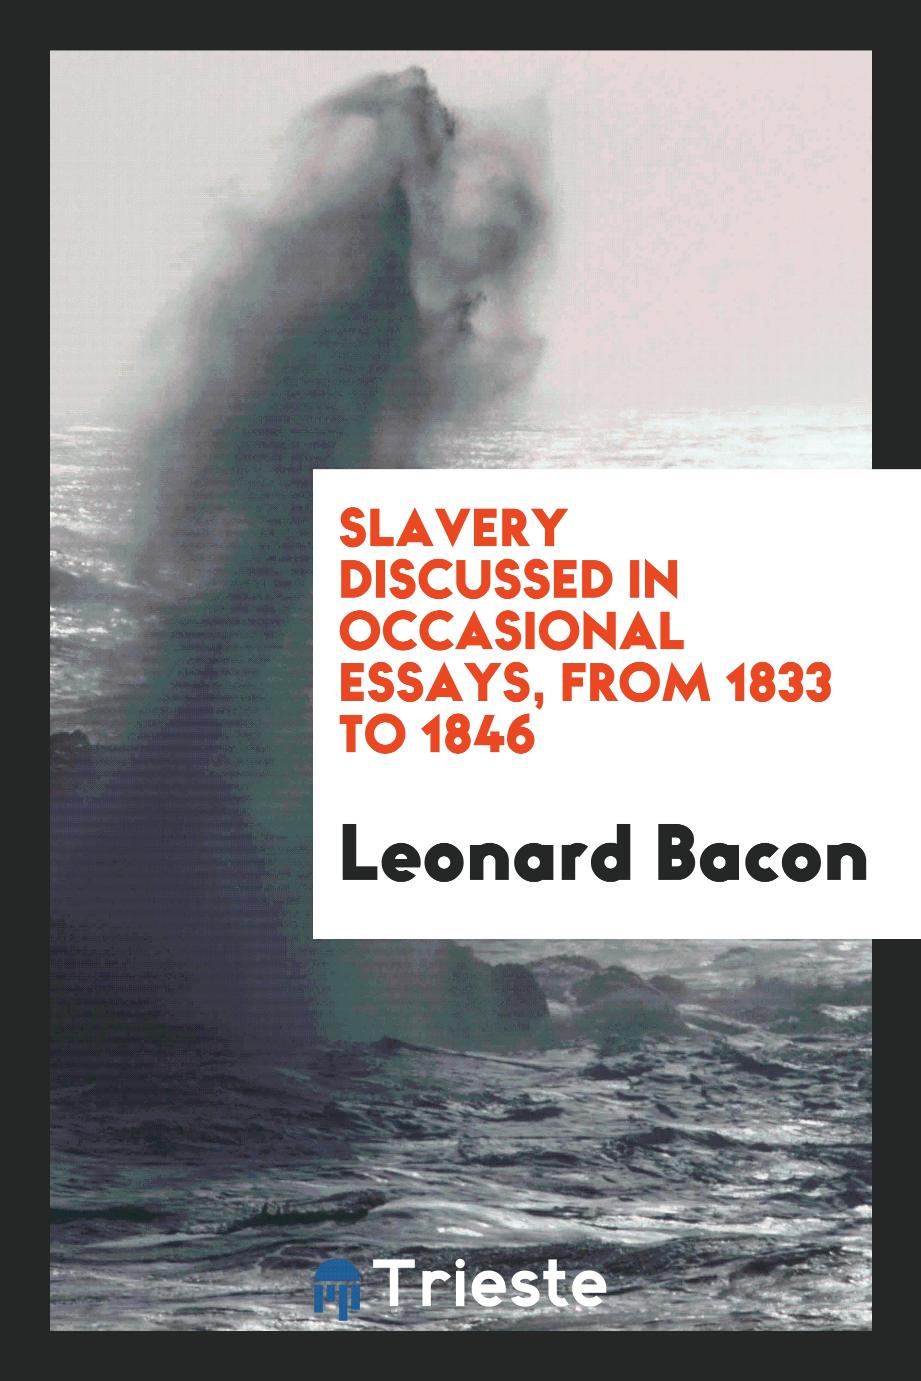 Slavery discussed in occasional essays, from 1833 to 1846